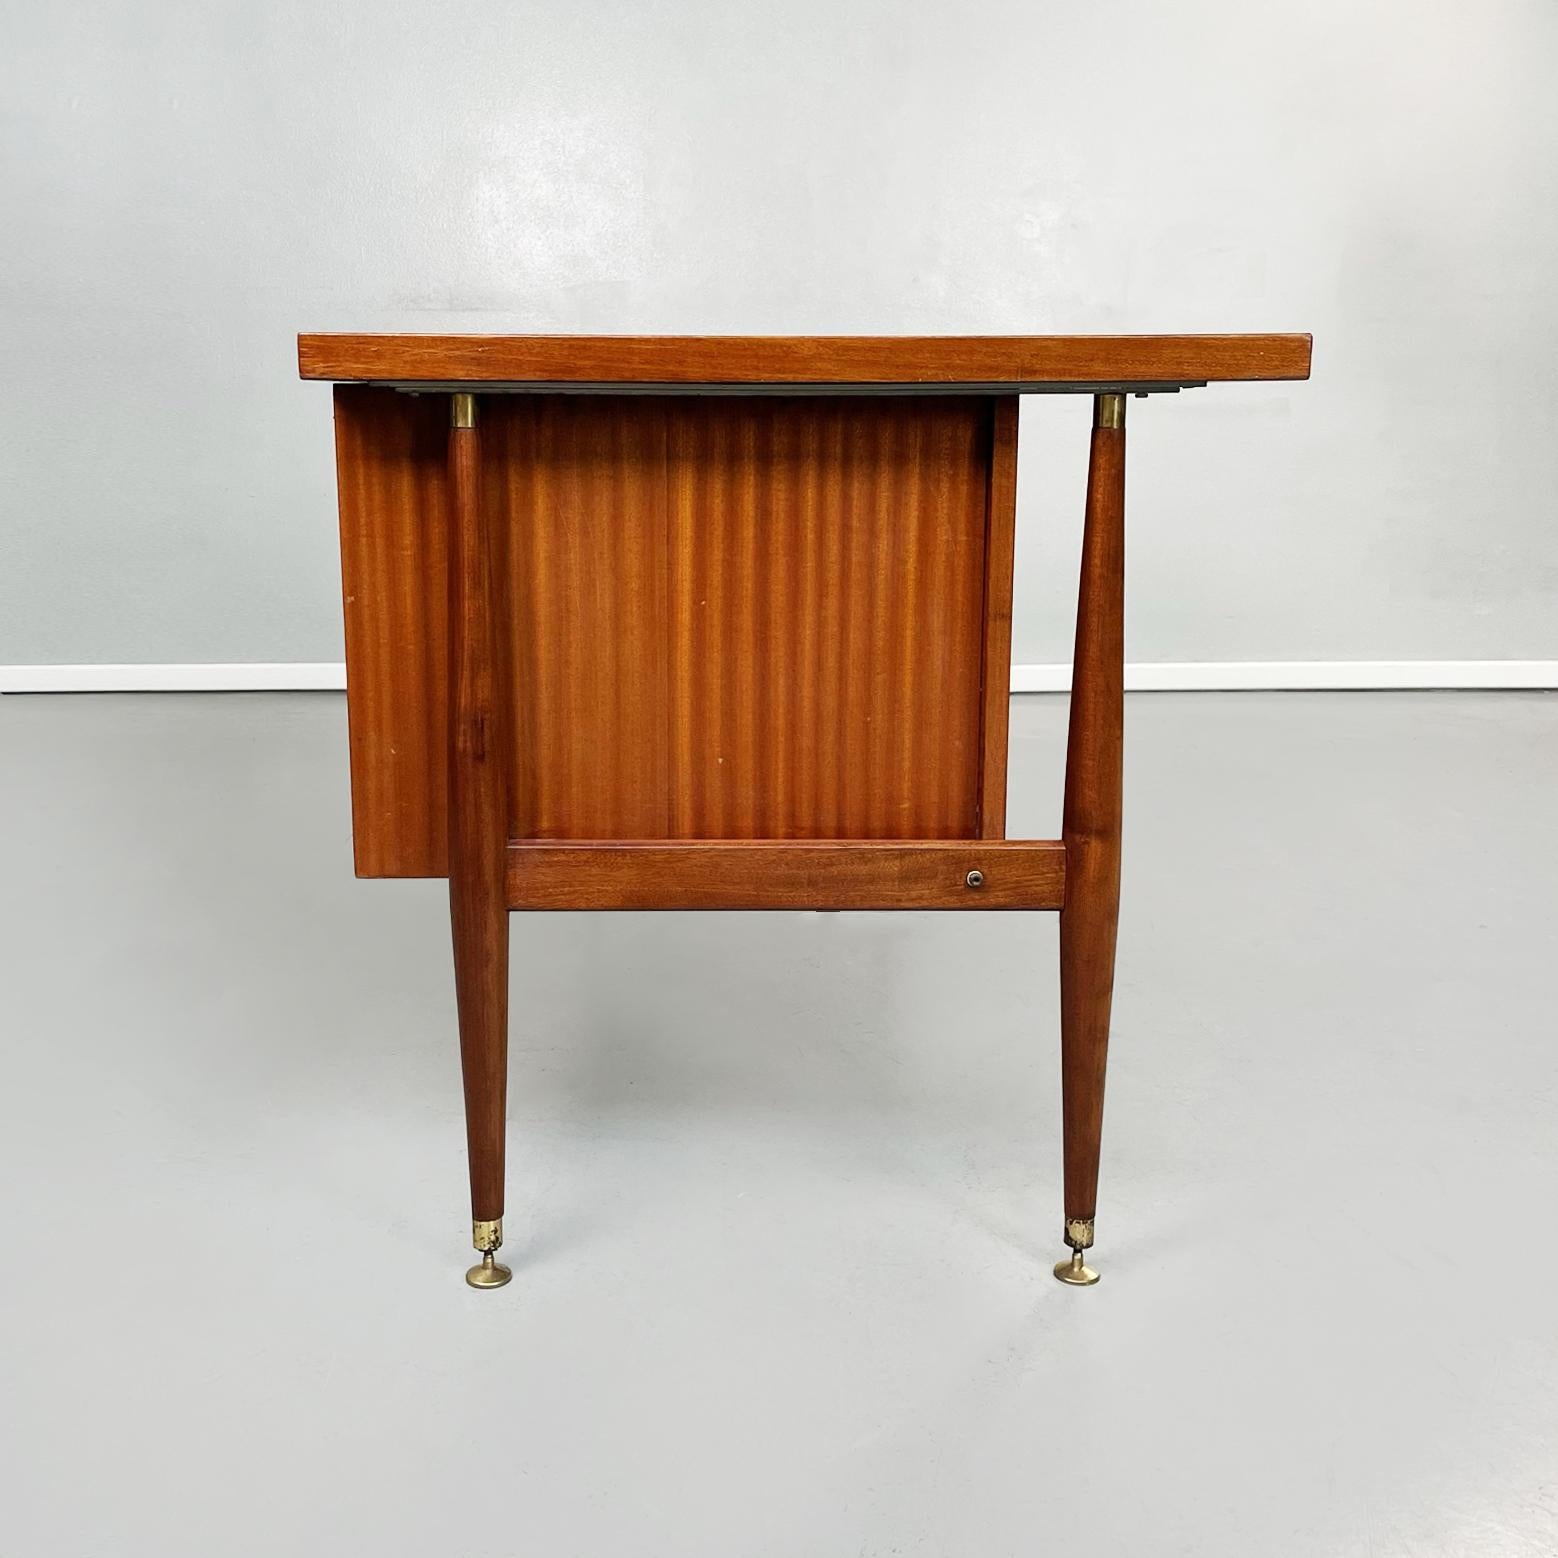 Mid-Century Modern Italian Mid-Century Wooden Desk with Brass and Plastic Drawers by Schirolli 1970